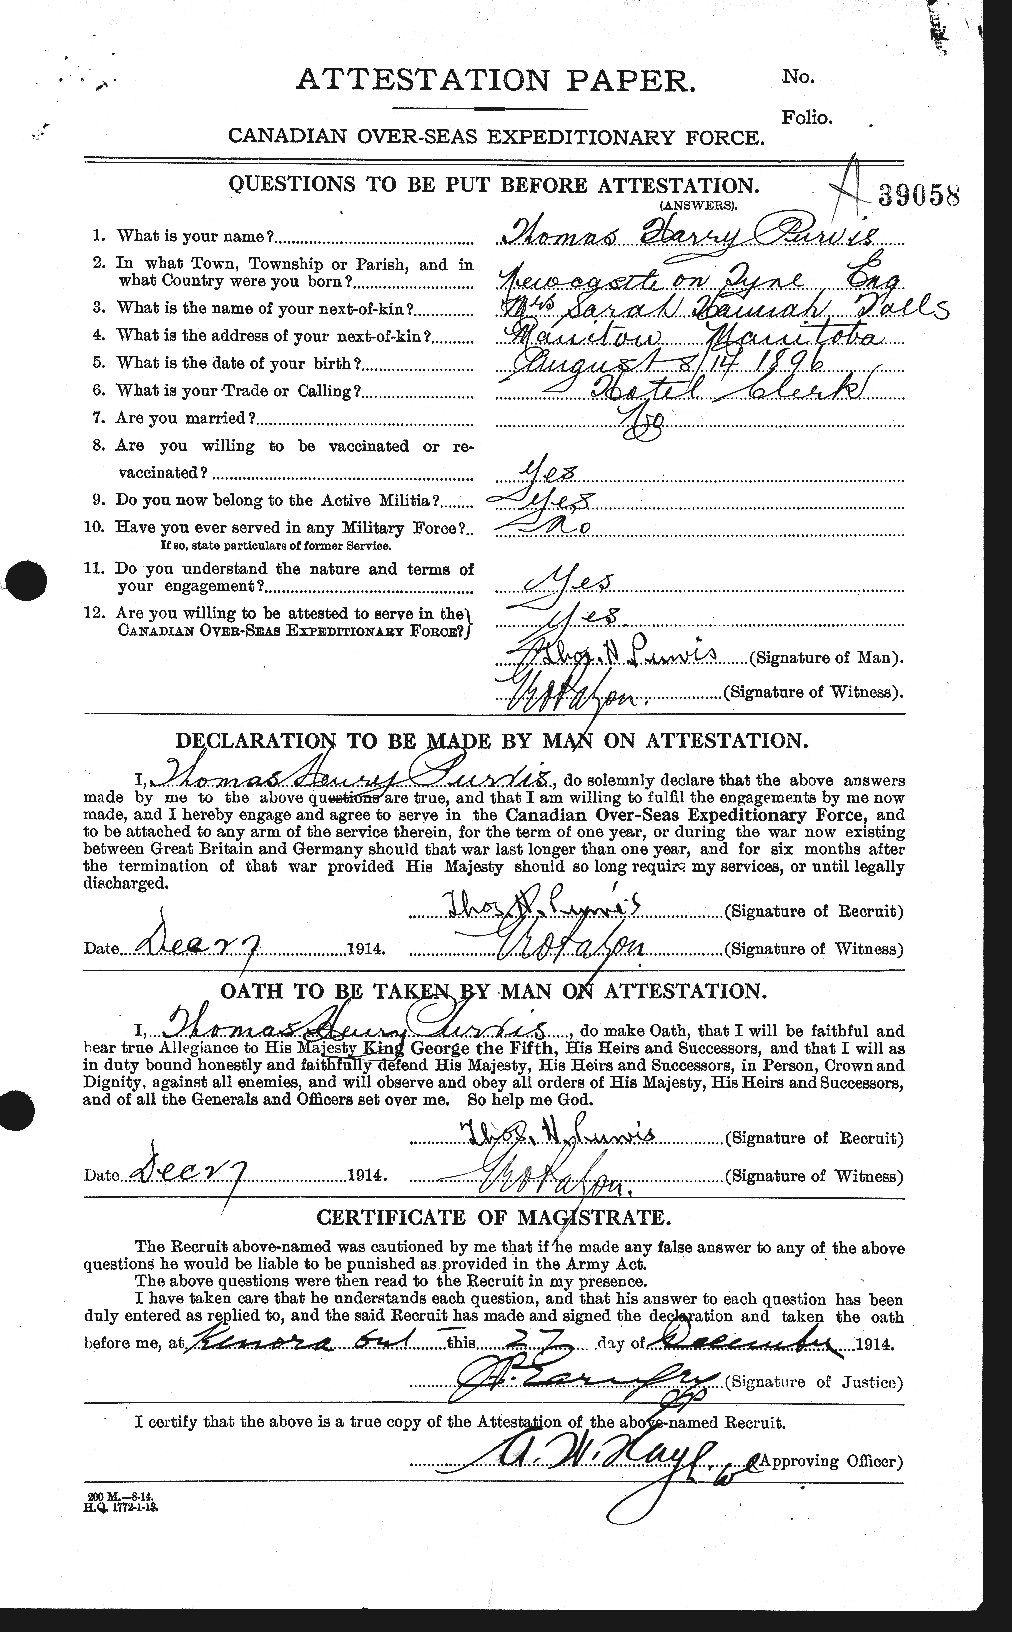 Personnel Records of the First World War - CEF 590014a